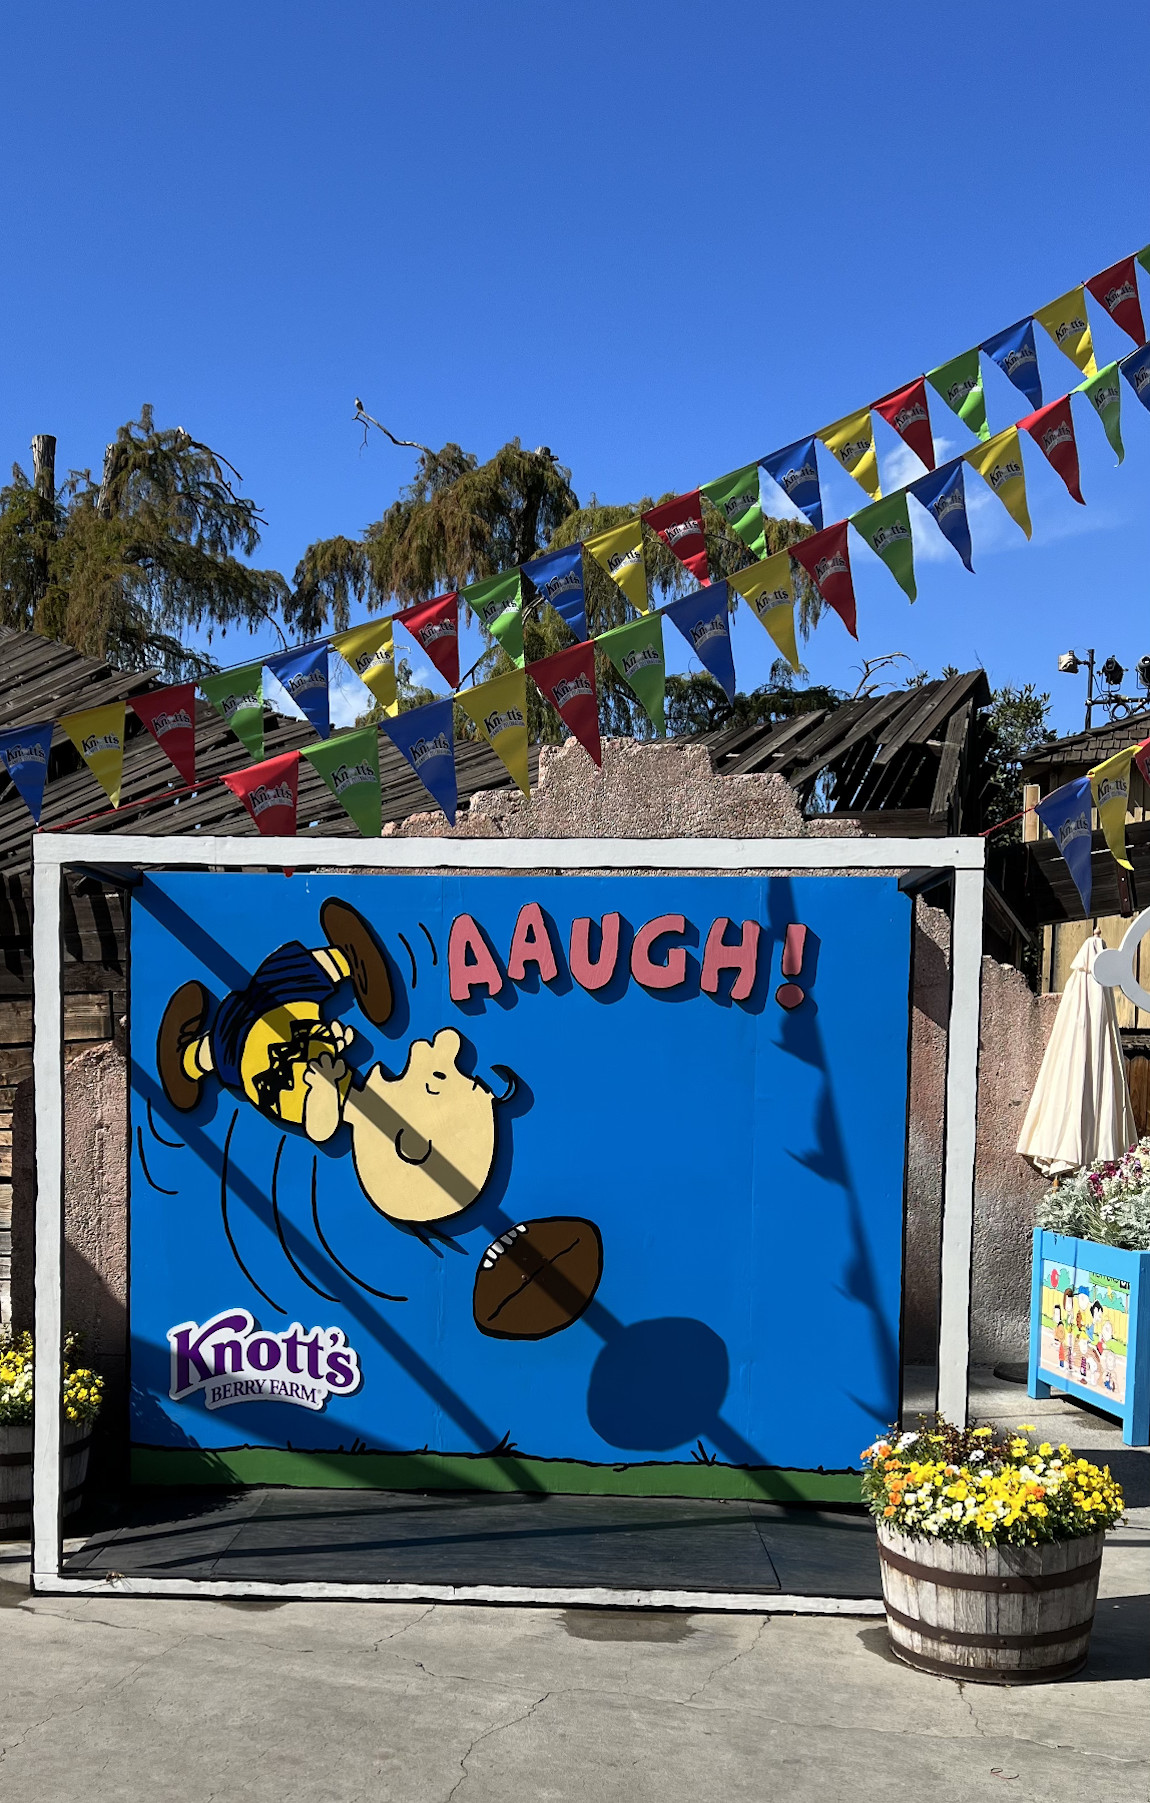 Knotts Berry Farm Entry Photo Spots Charlie Brown